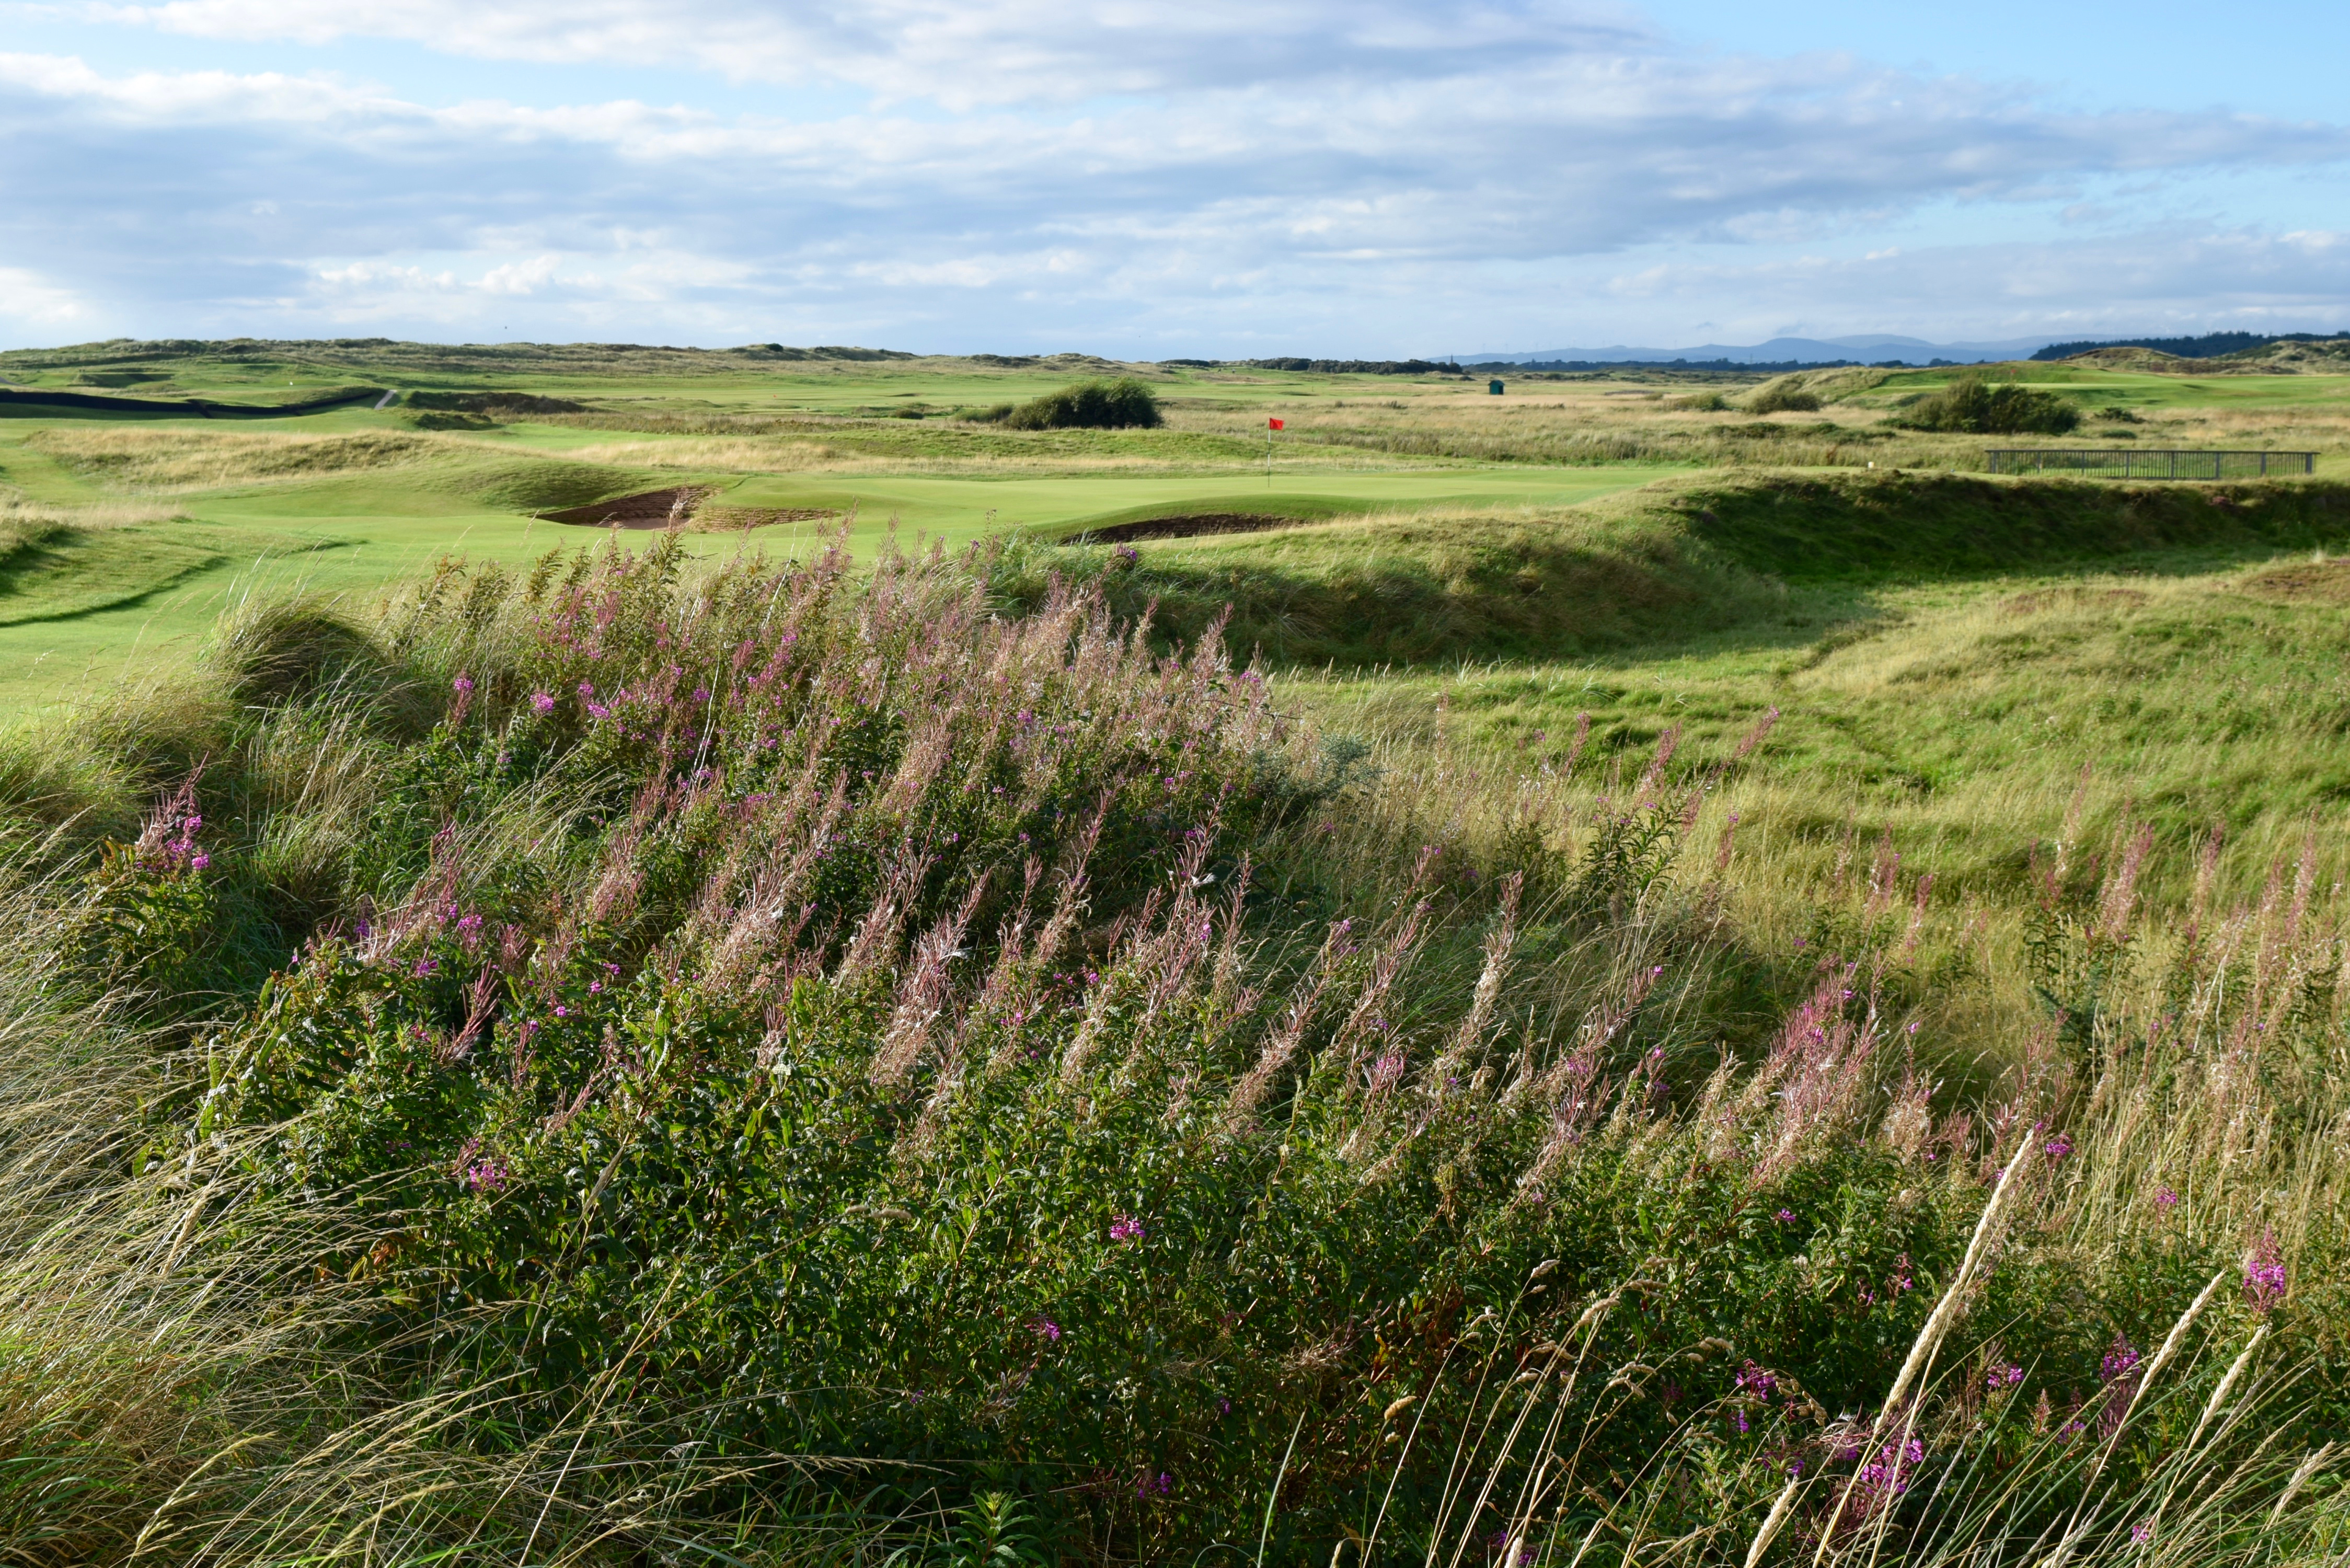 Scotland, day four: Prestwick GC, as old as golf and still feisty